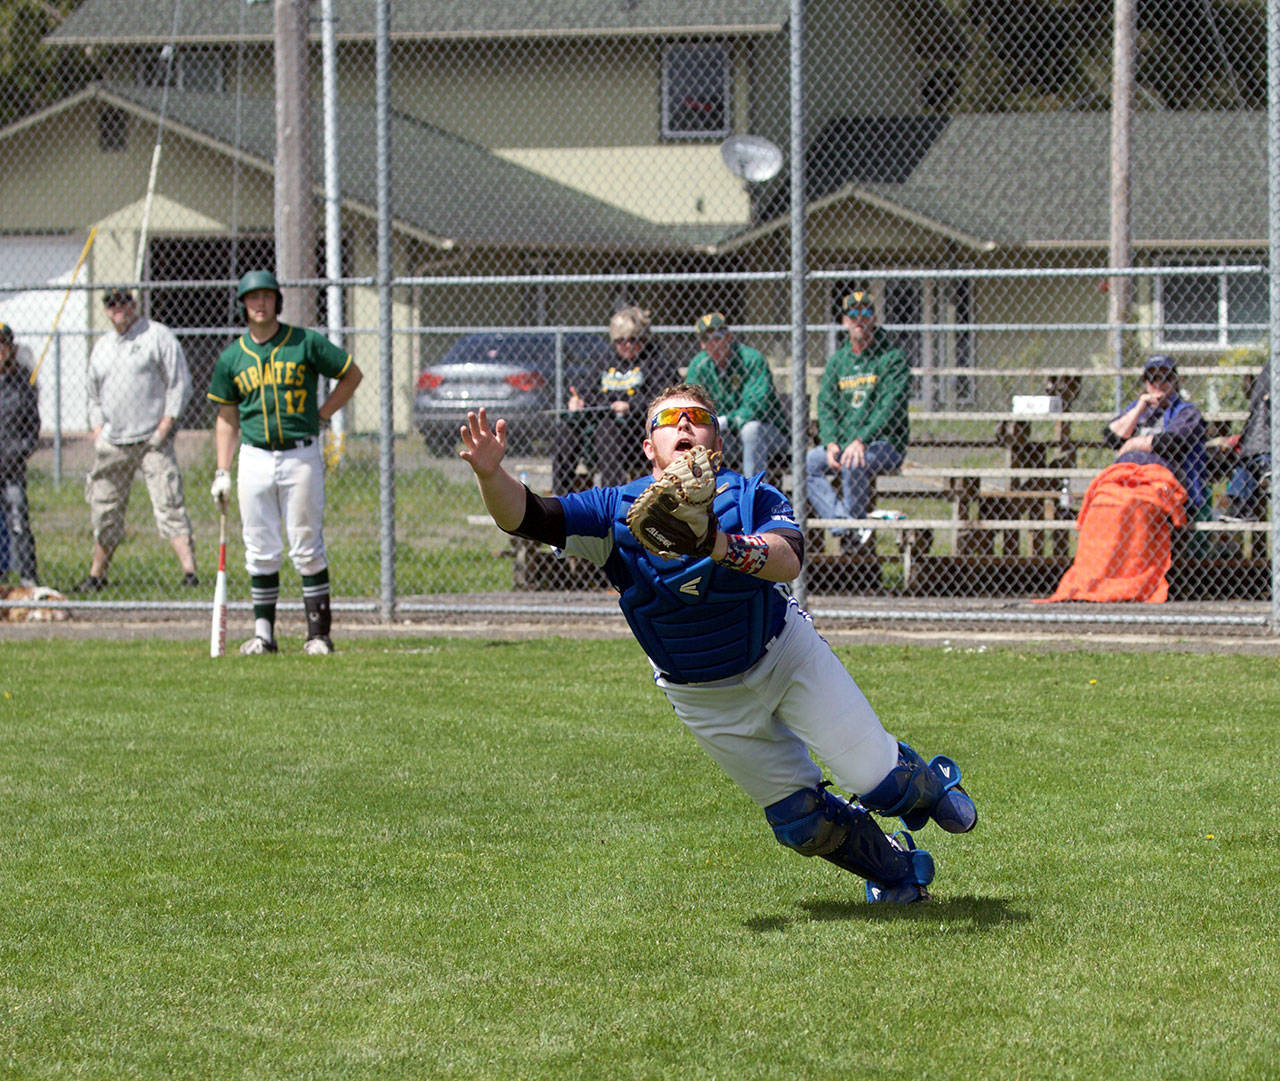 Steve Mullensky/for Peninsula Daily News Chimacum catcher, Lane Dotson, dives for a pop-up during a play-off game against Vashon on Saturday in Chimacum.